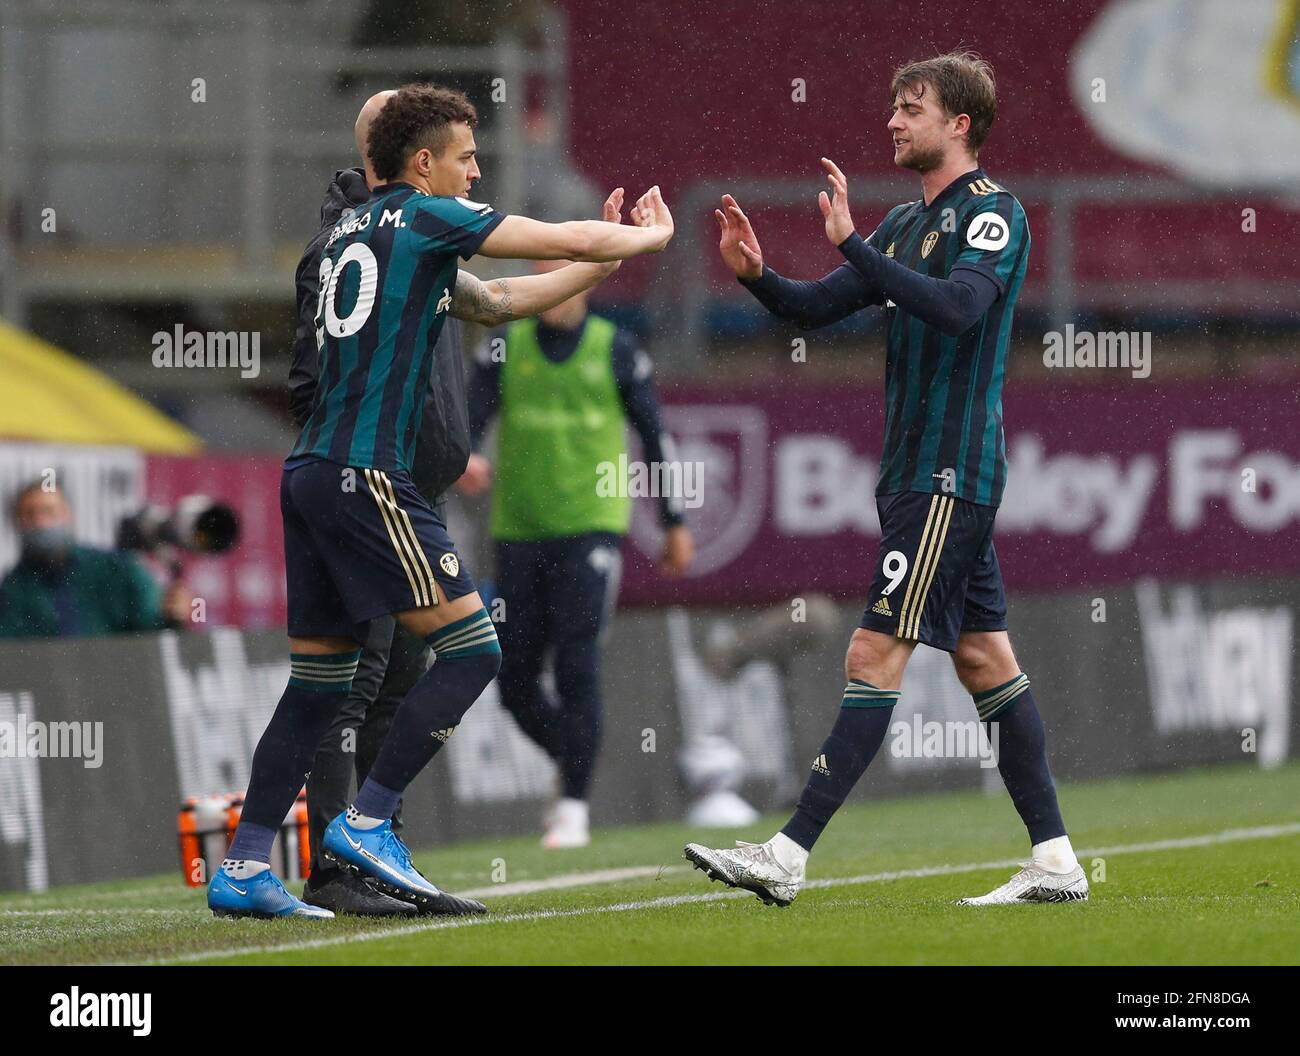 Burnley, UK. 15th May, 2021. Rodrigo Moreno of Leeds United replaces Patrick Bamford of Leeds United during the Premier League match at Turf Moor, Burnley. Picture credit should read: Darren Staples/Sportimage Credit: Sportimage/Alamy Live News Stock Photo